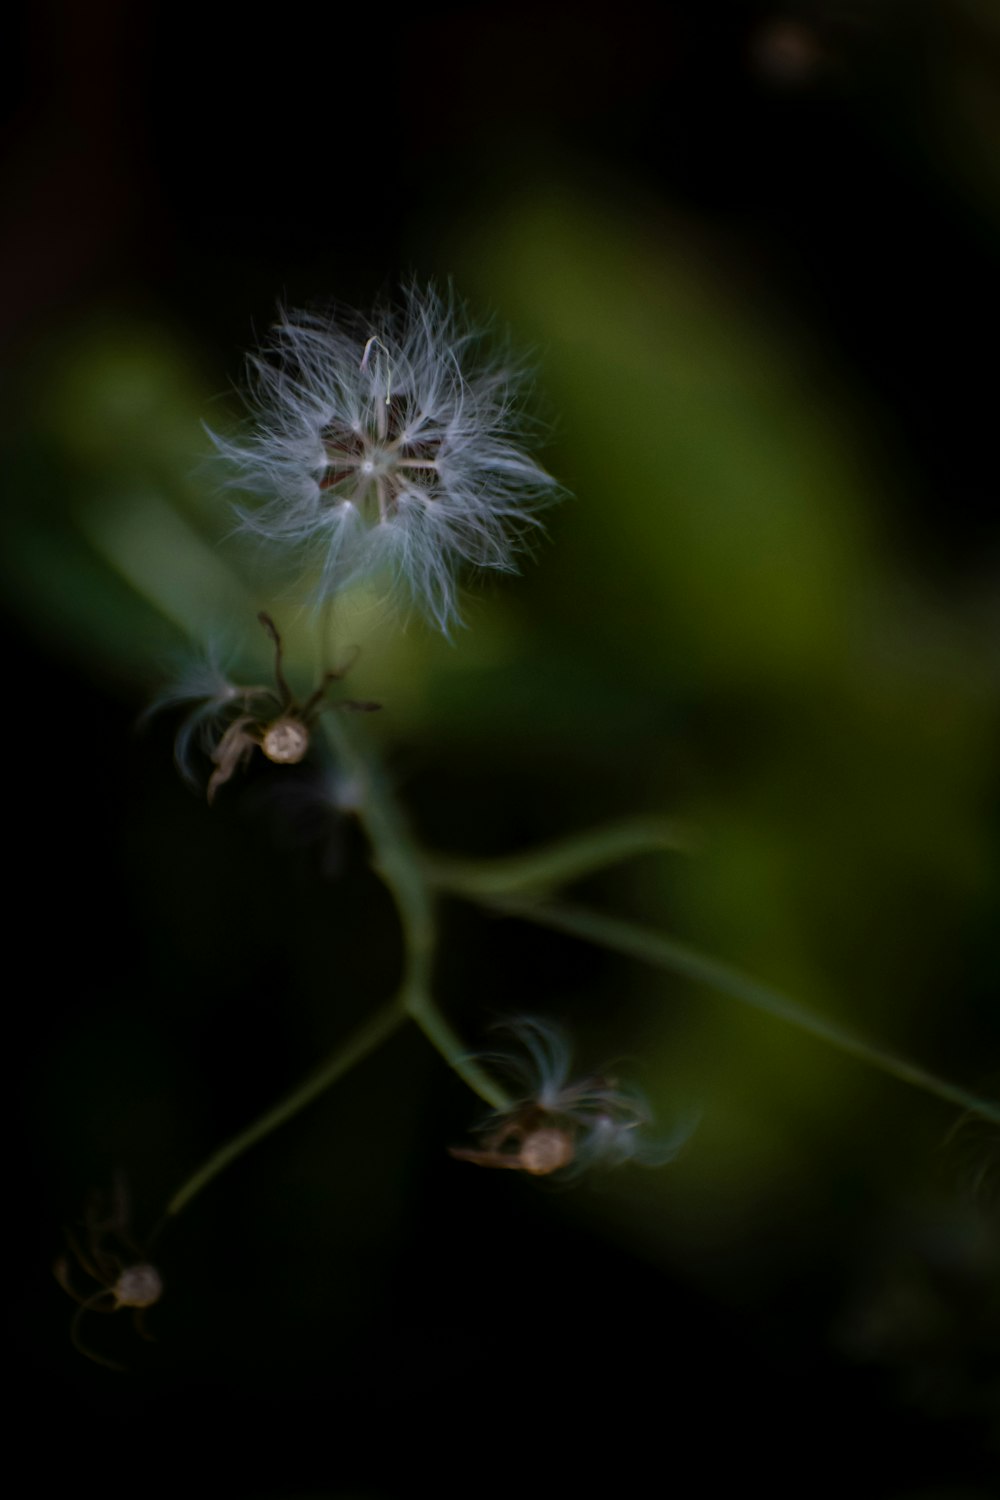 a close up of a dandelion on a black background